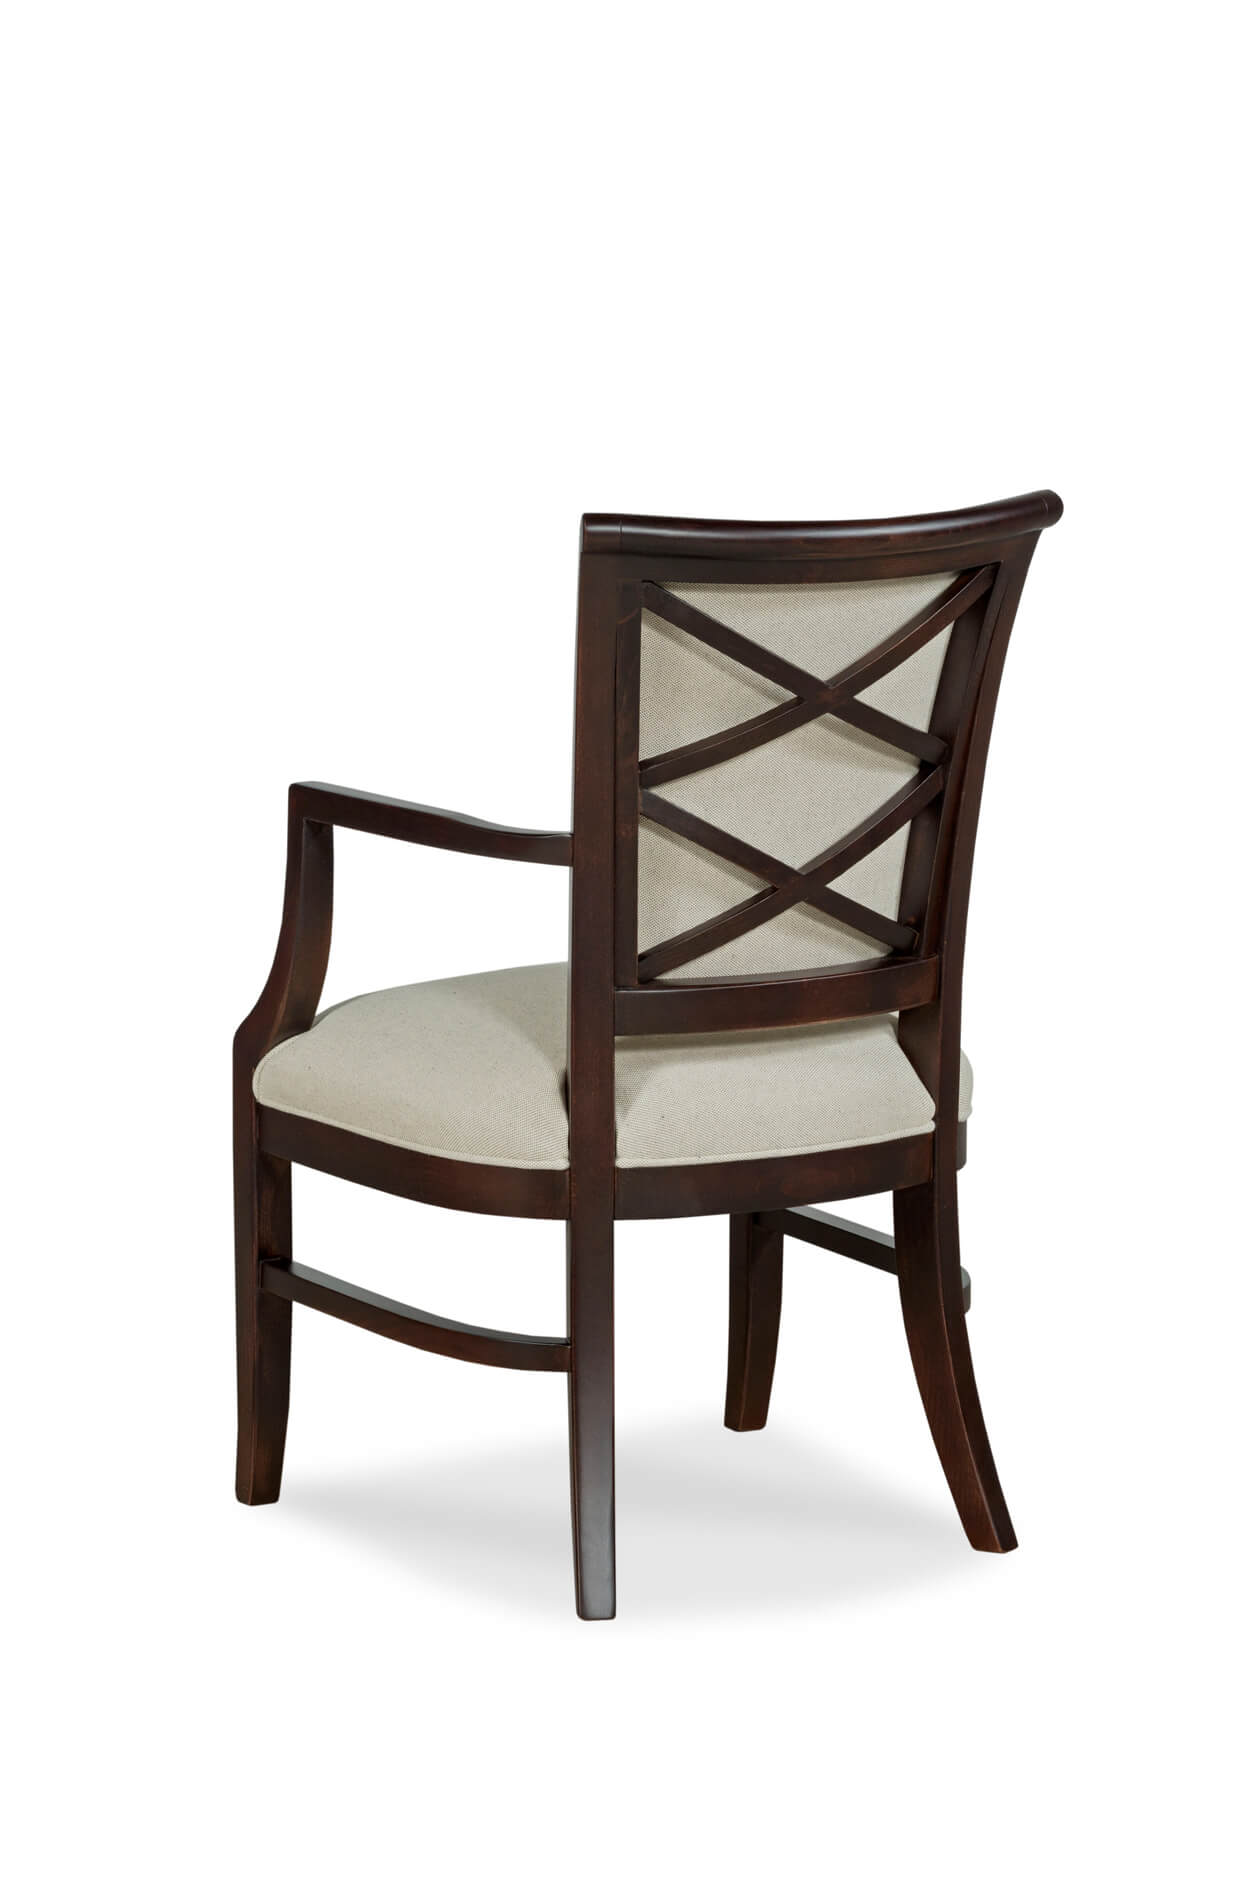 Buy Fairfields Mackay Upholstered Dining Arm Chair Free Shipping